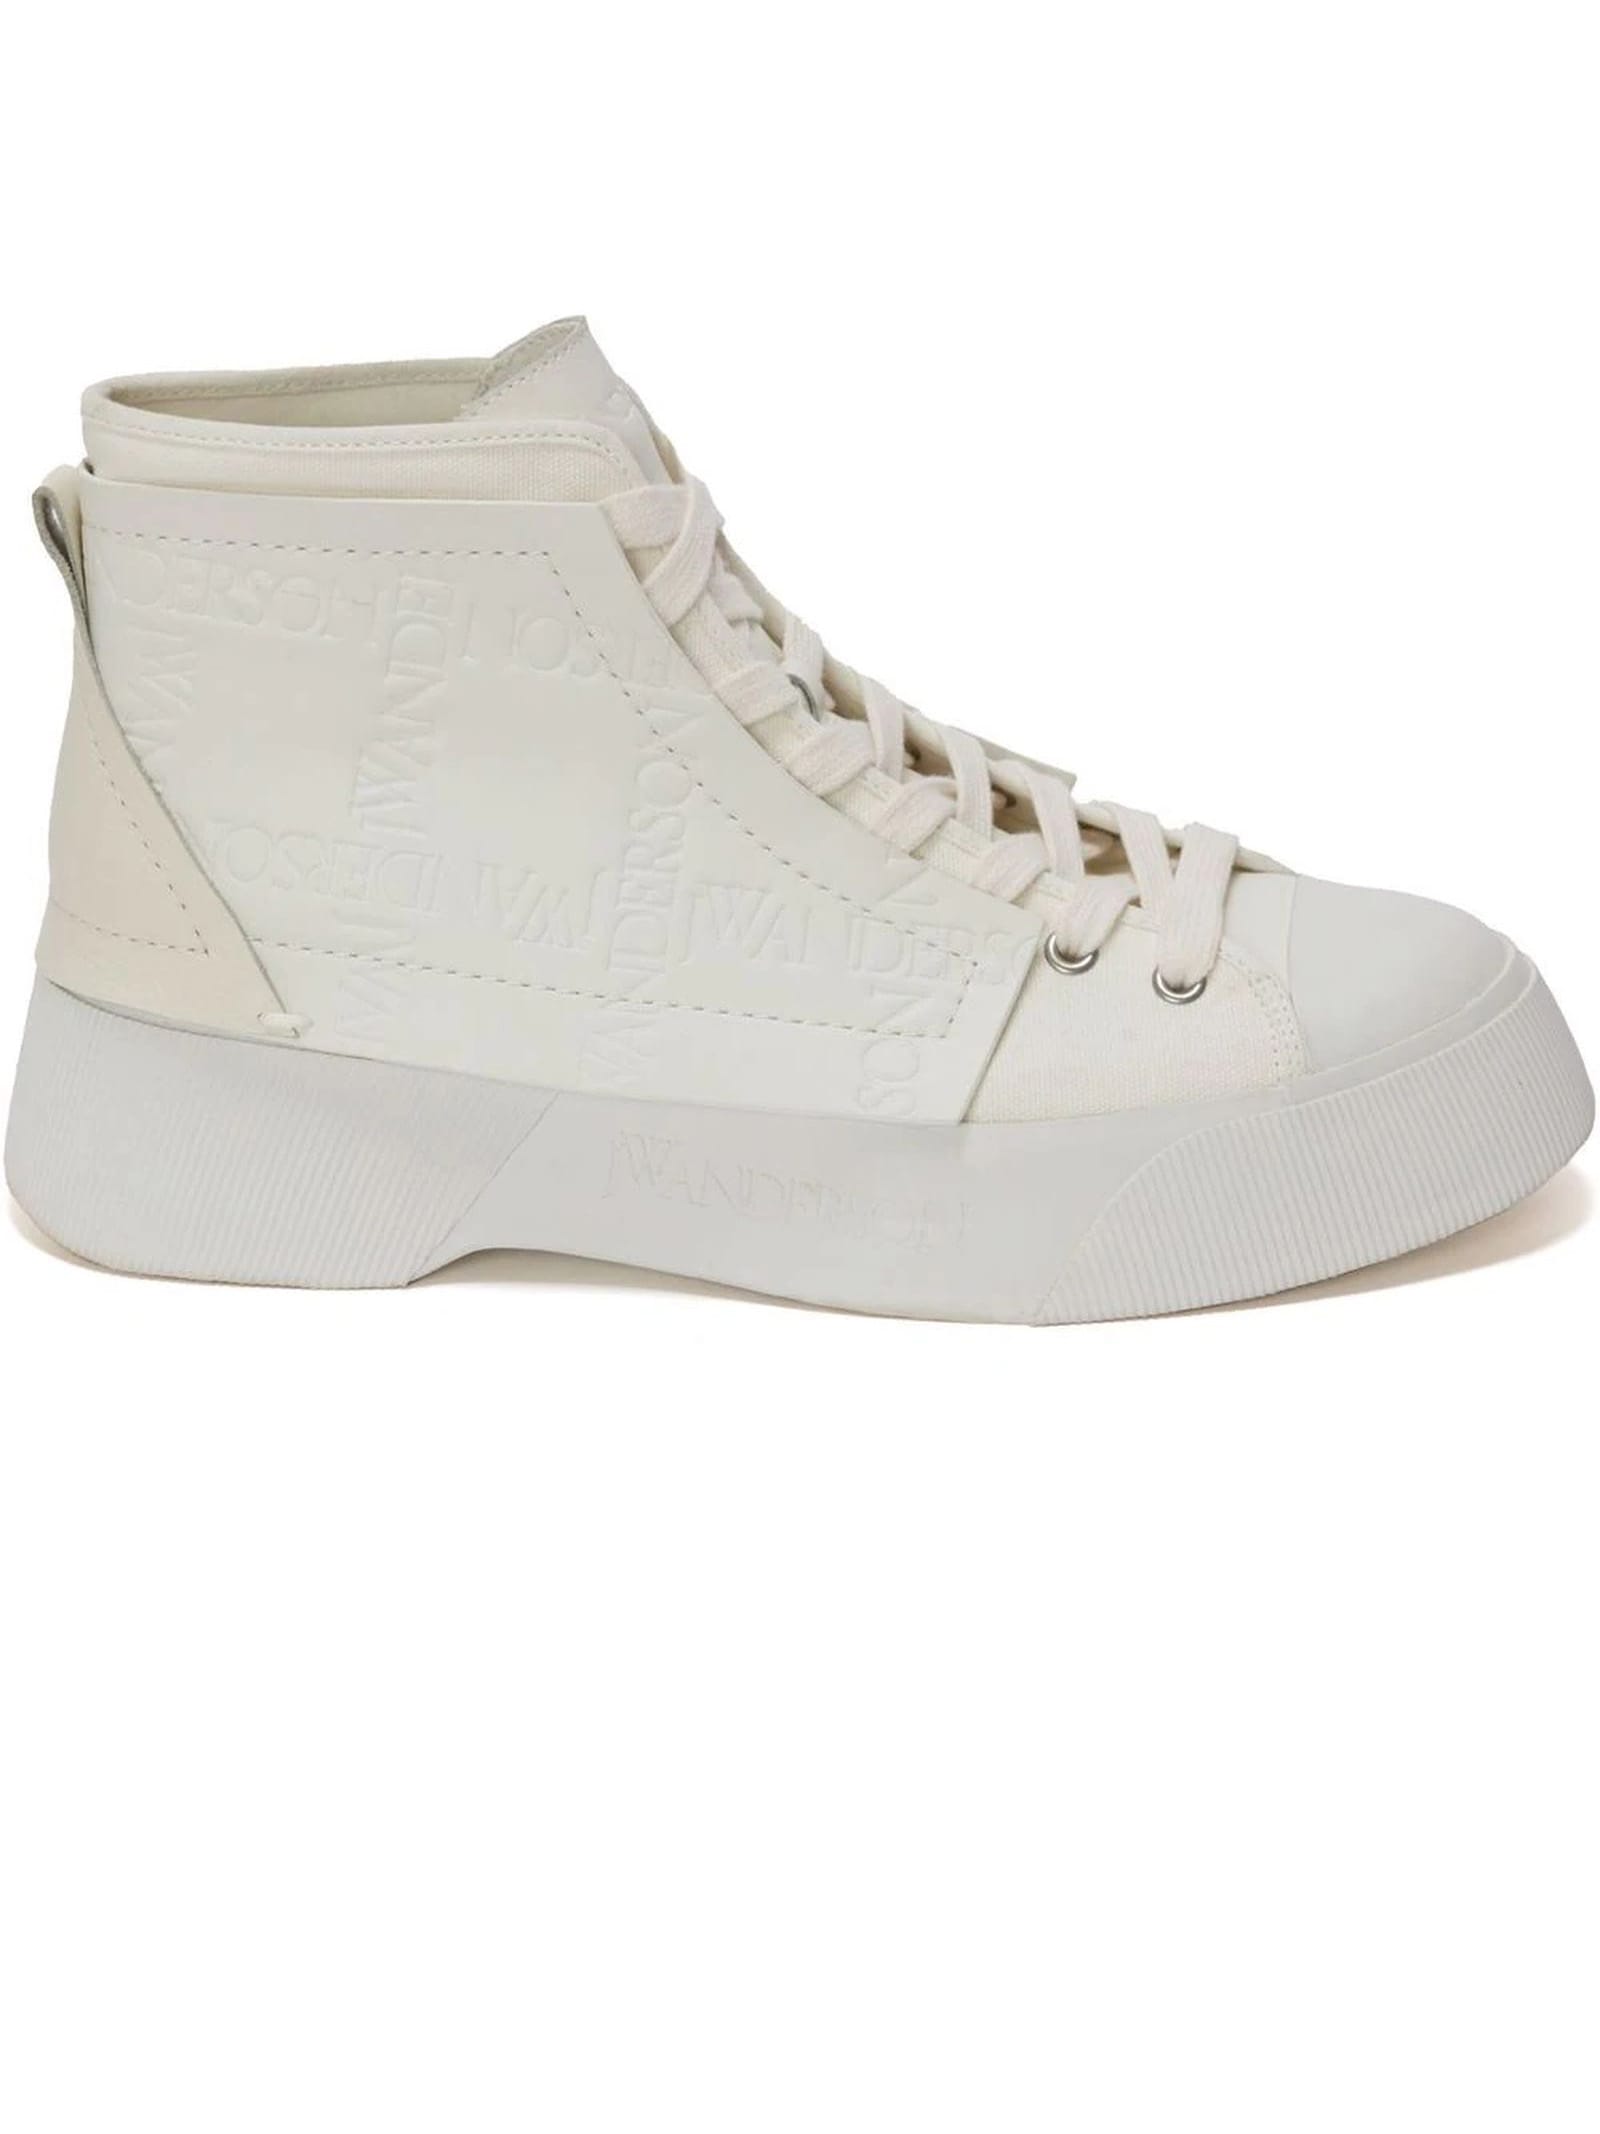 J.W. Anderson White Cotton And Leather Sneakers